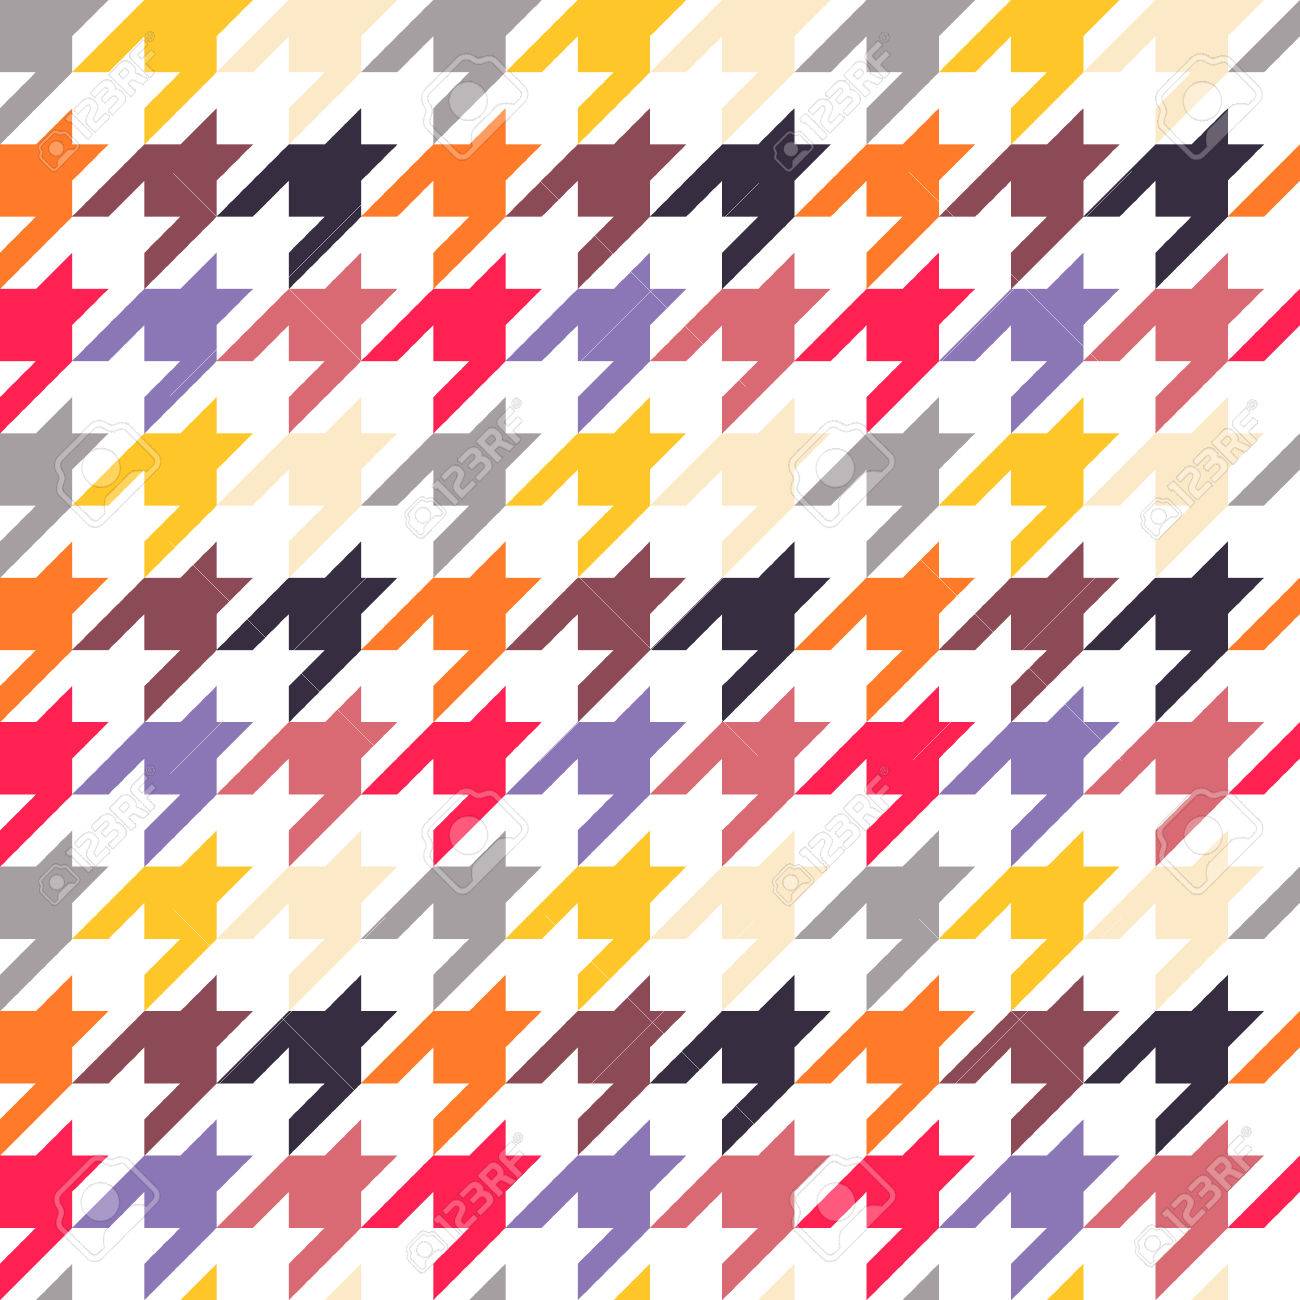 Houndstooth Seamless Pattern Colorful Can Be Used For Wallpaper